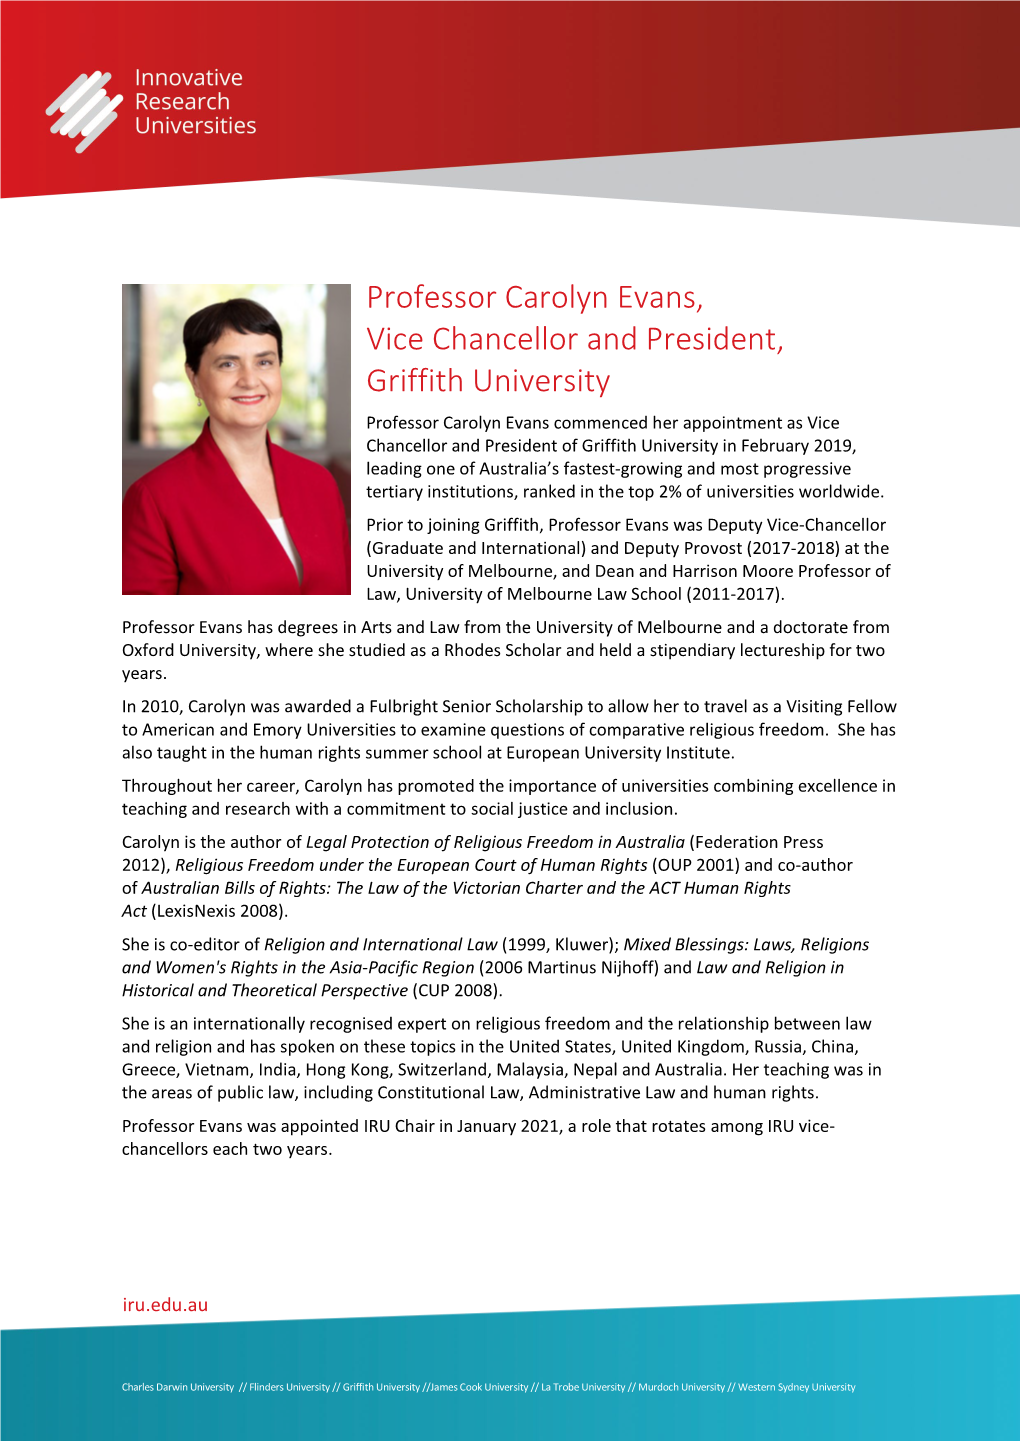 Professor Carolyn Evans, Vice Chancellor and President, Griffith